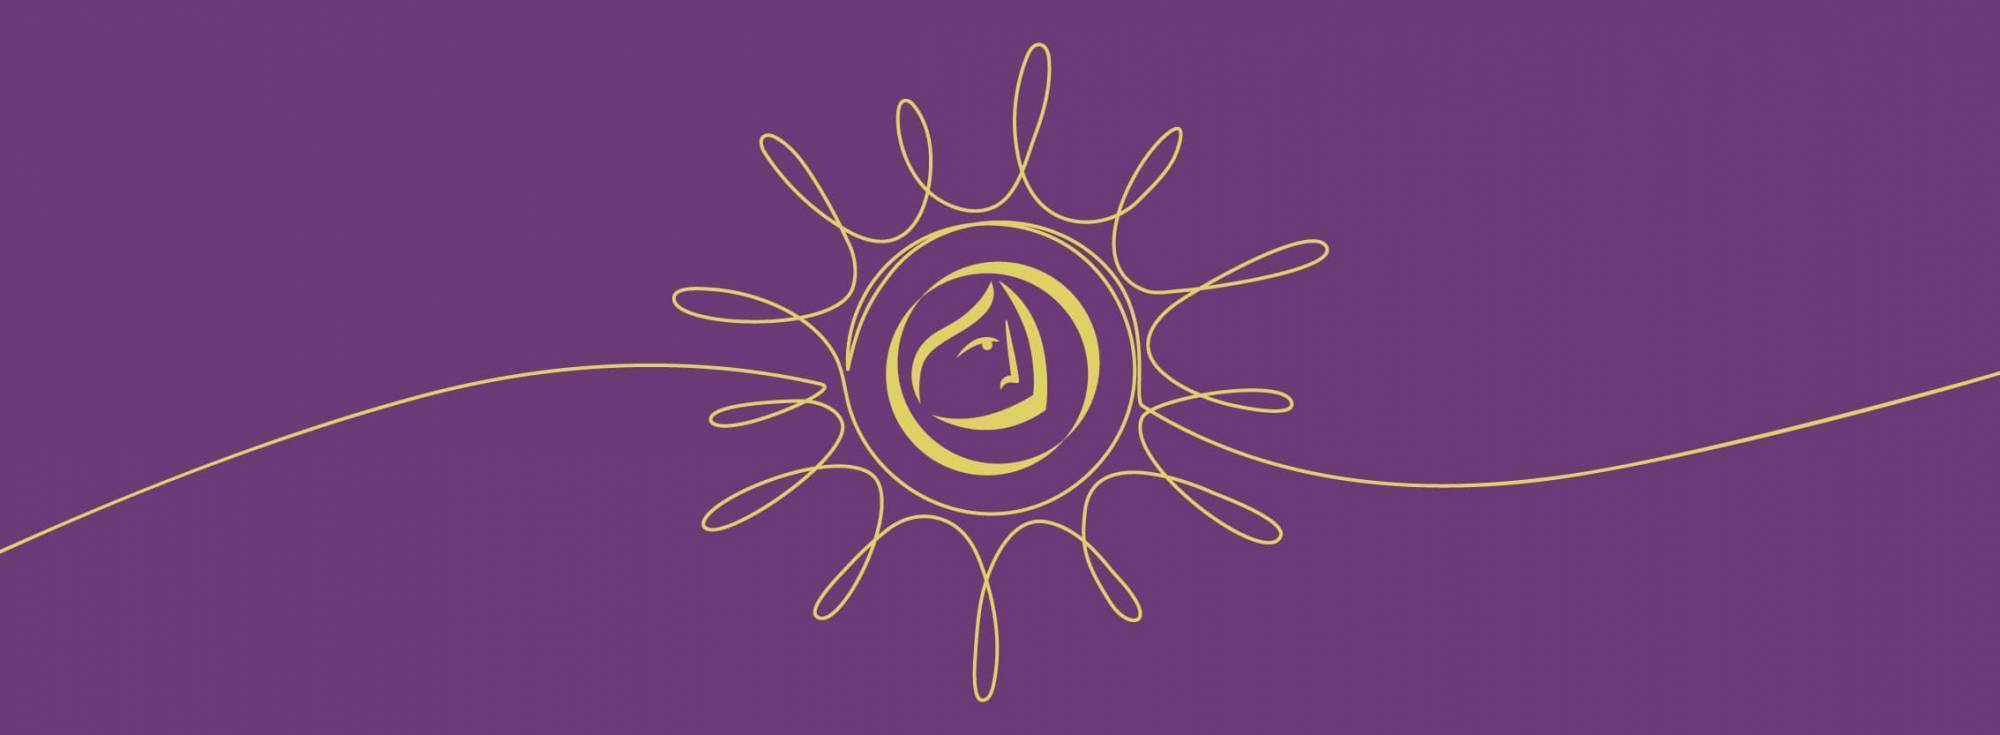 the Center for Women and Families logo in gold with a looping design around it on a purple background